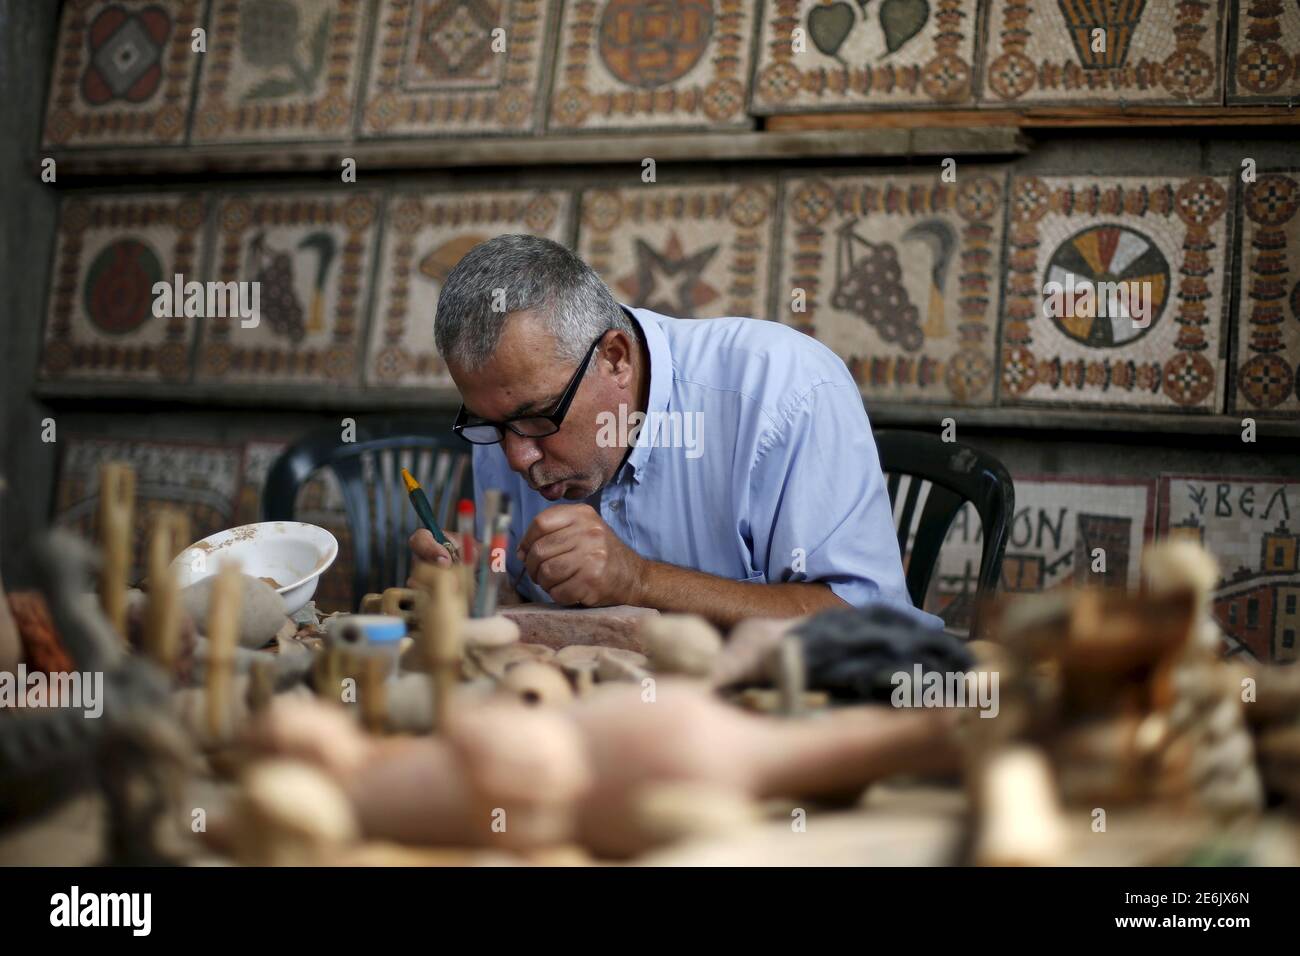 Archeology Nafez Abed cleans sculptures at his workroom, at Shati refugee camp in Gaza City, November 8, 2015. Nafez Abed's cramped workroom is filled with sculptures and intricate mosaics decorated with patterns from the Byzantine, Greek and Roman periods. It is an emporium of Middle Eastern antiquity tucked away in Gaza. And none of it is real. Picture taken November 8, 2015. To match story PALESTINIANS-ARCHAEOLOGY REUTERS/Suhaib Salem Stock Photo